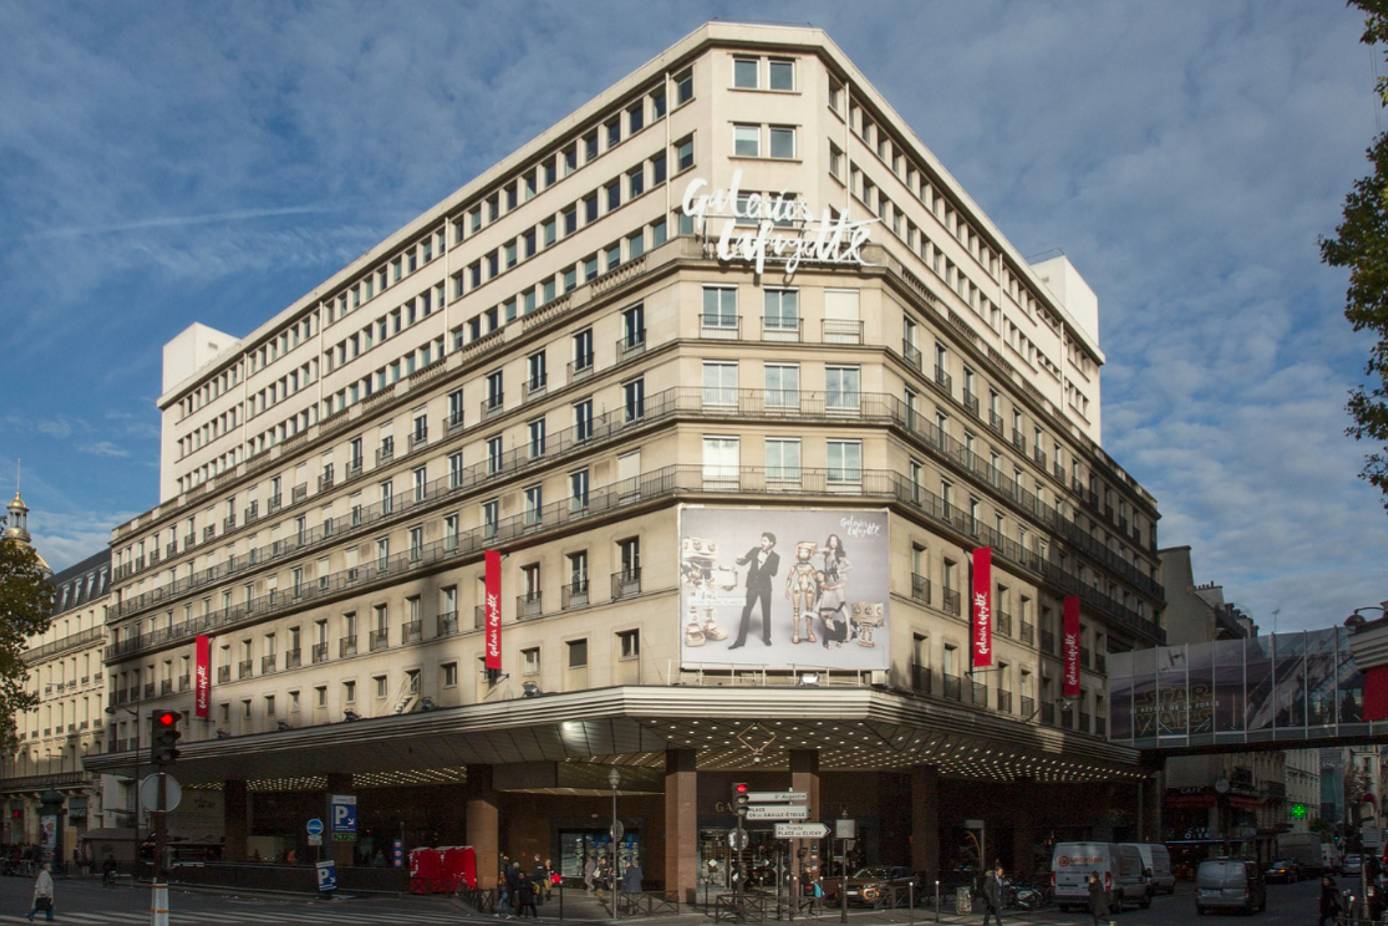 Galeries Lafayette will open two stores in India